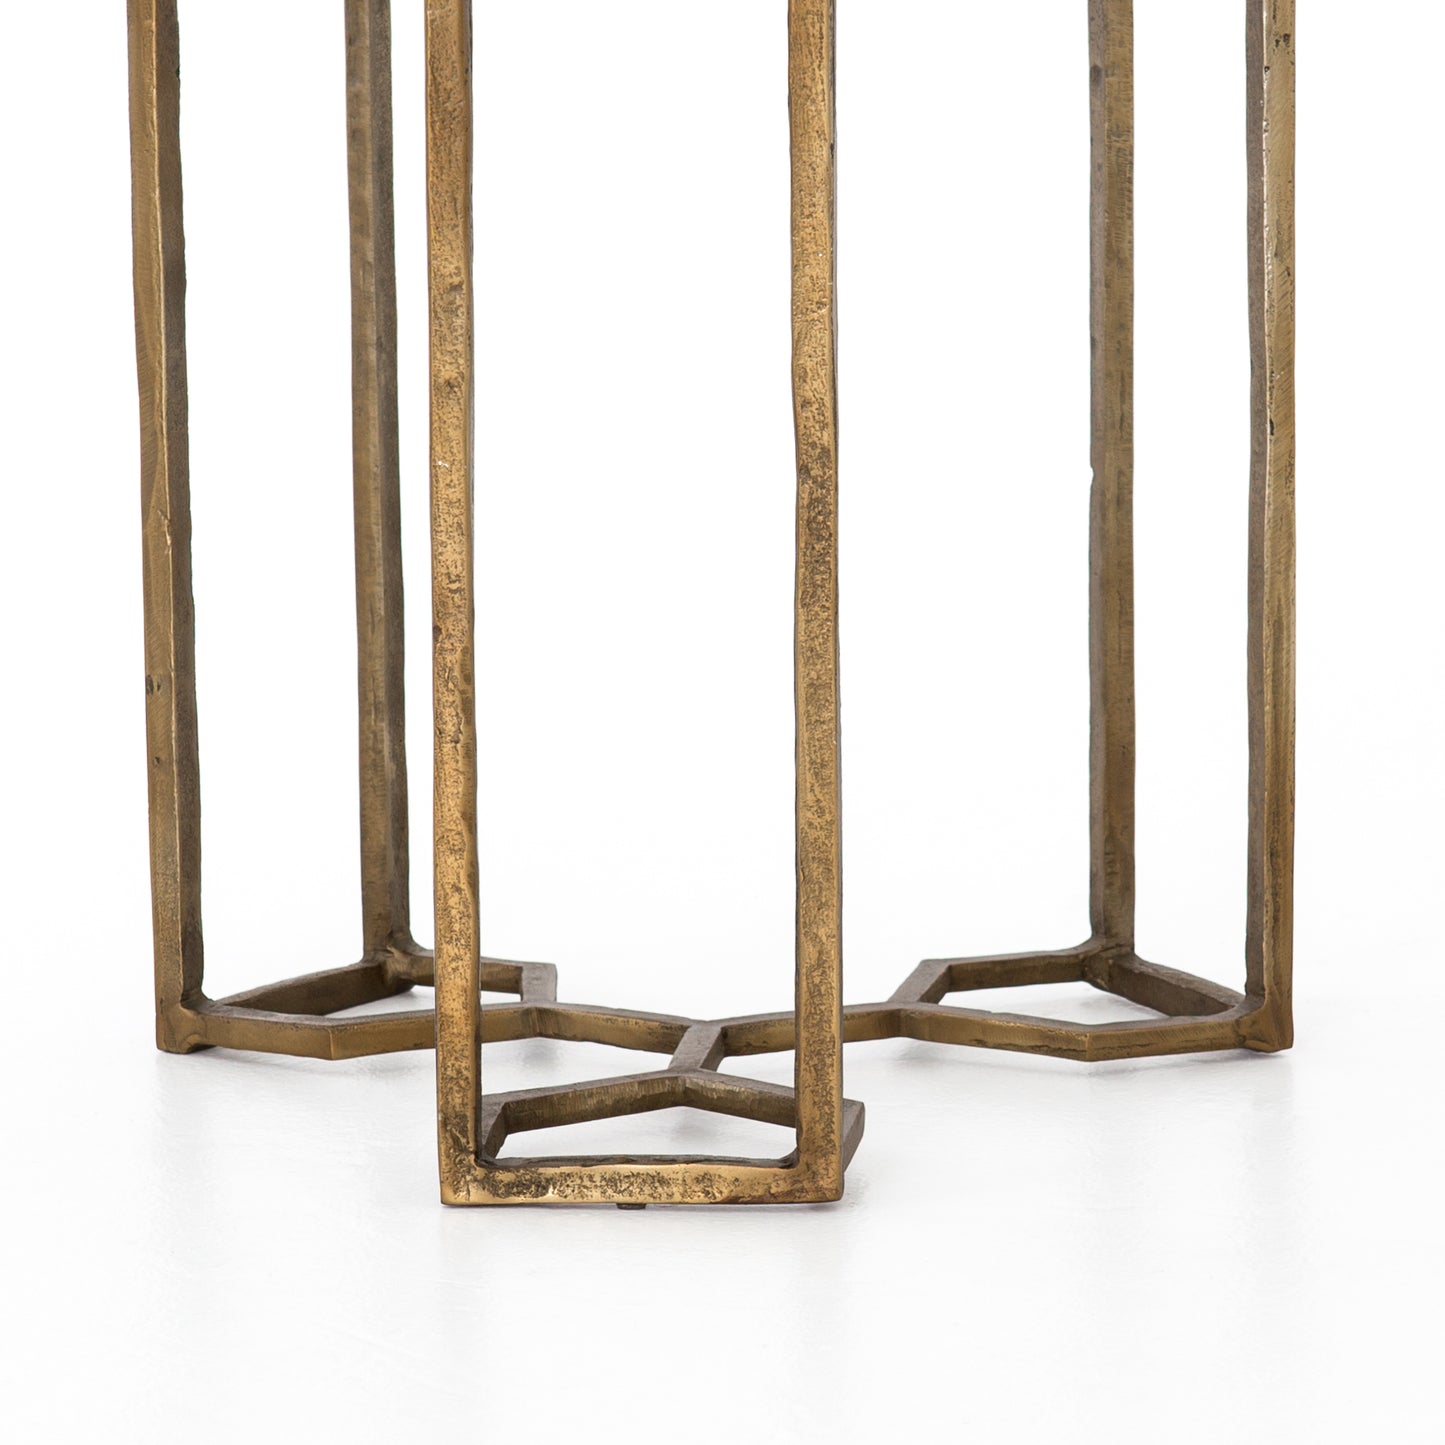 Naomi Marble End Table-Raw Brass